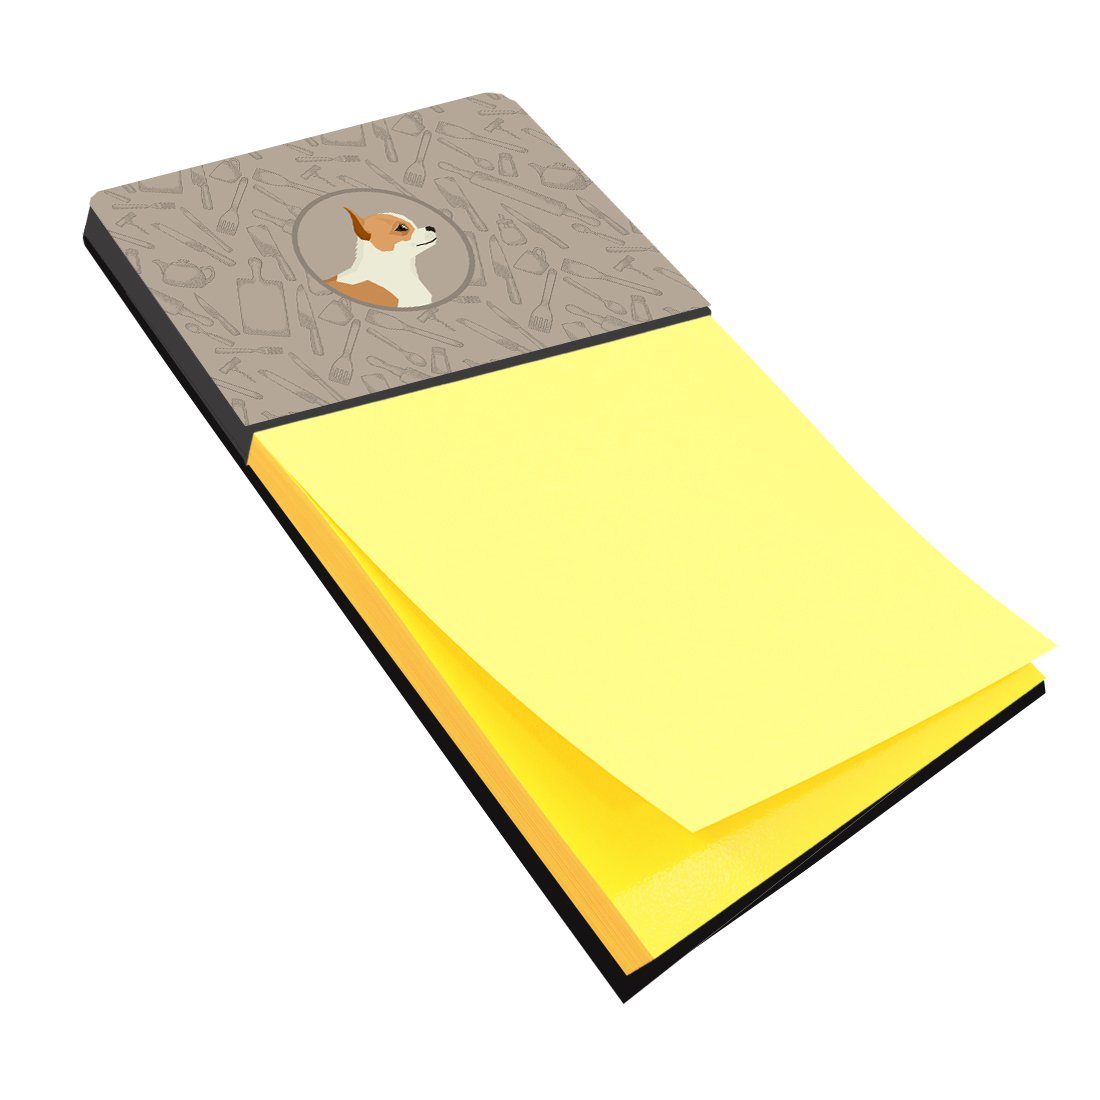 Chihuahua In the Kitchen Sticky Note Holder CK2177SN by Caroline's Treasures